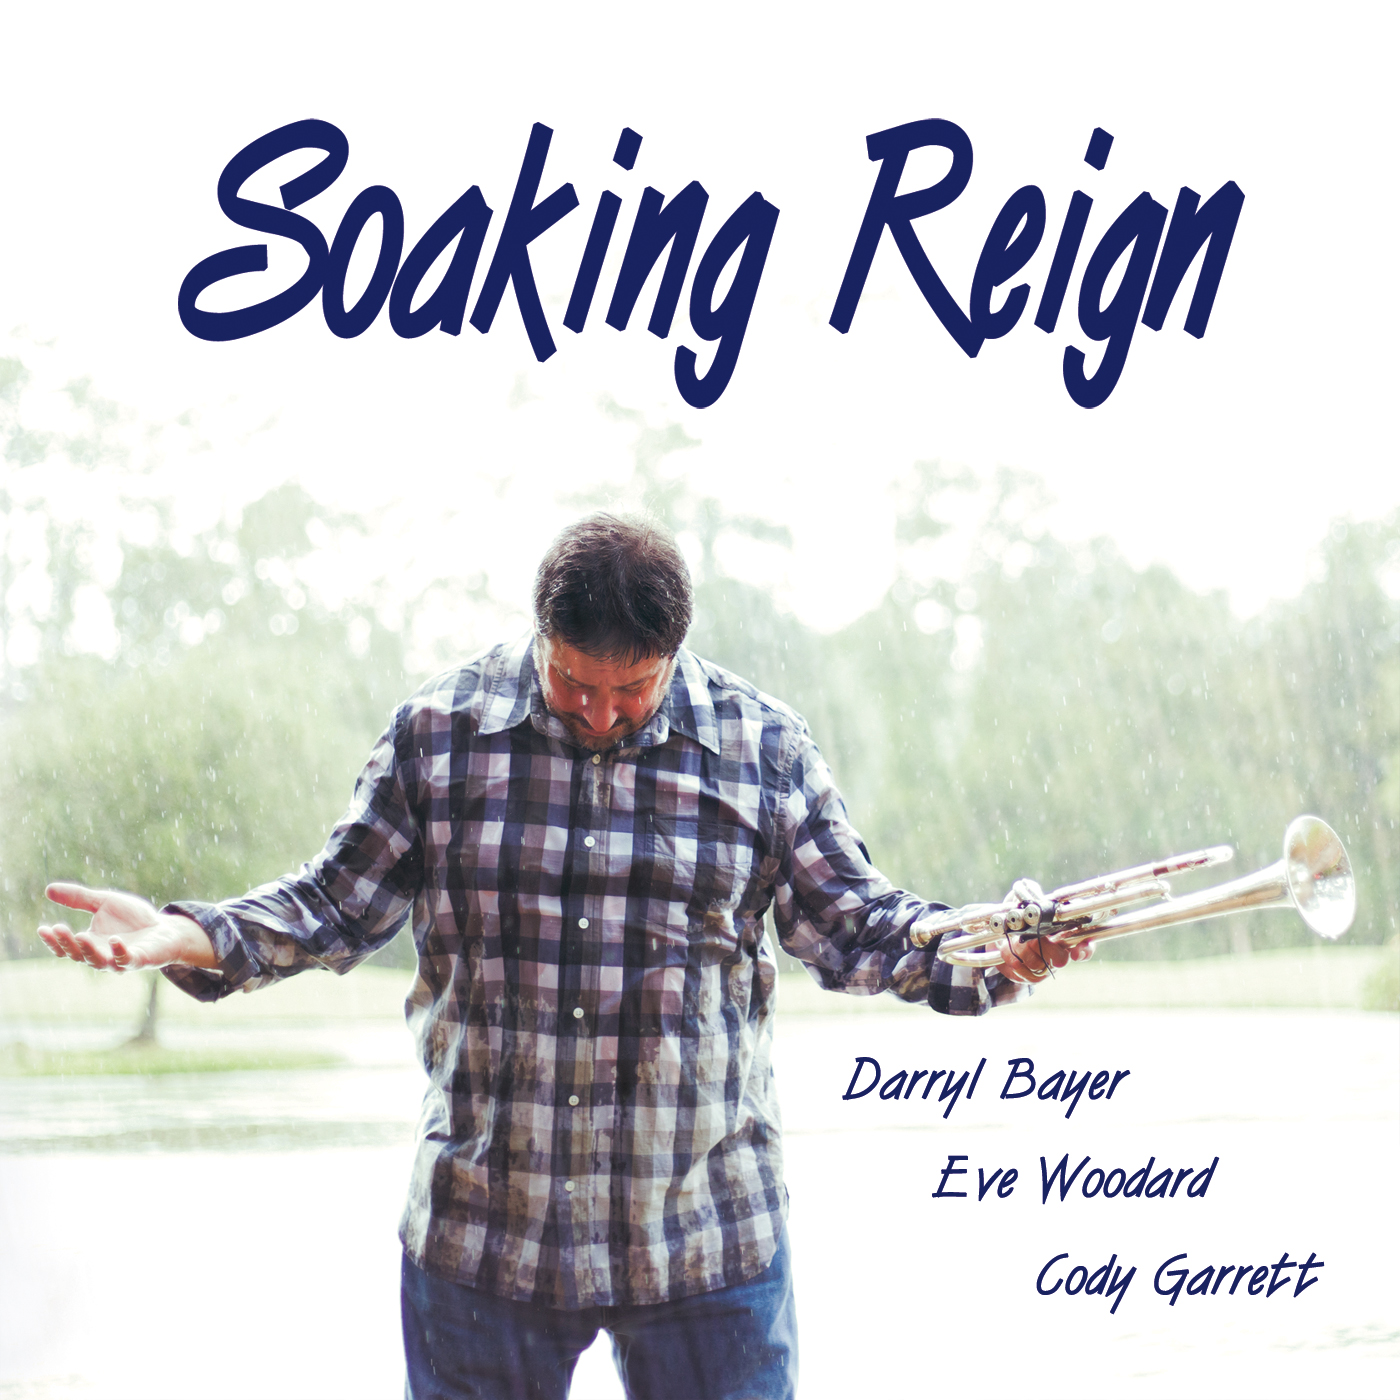 Darryl Bayer's First Ever Trumpet Soaking CD, Soaking Reign